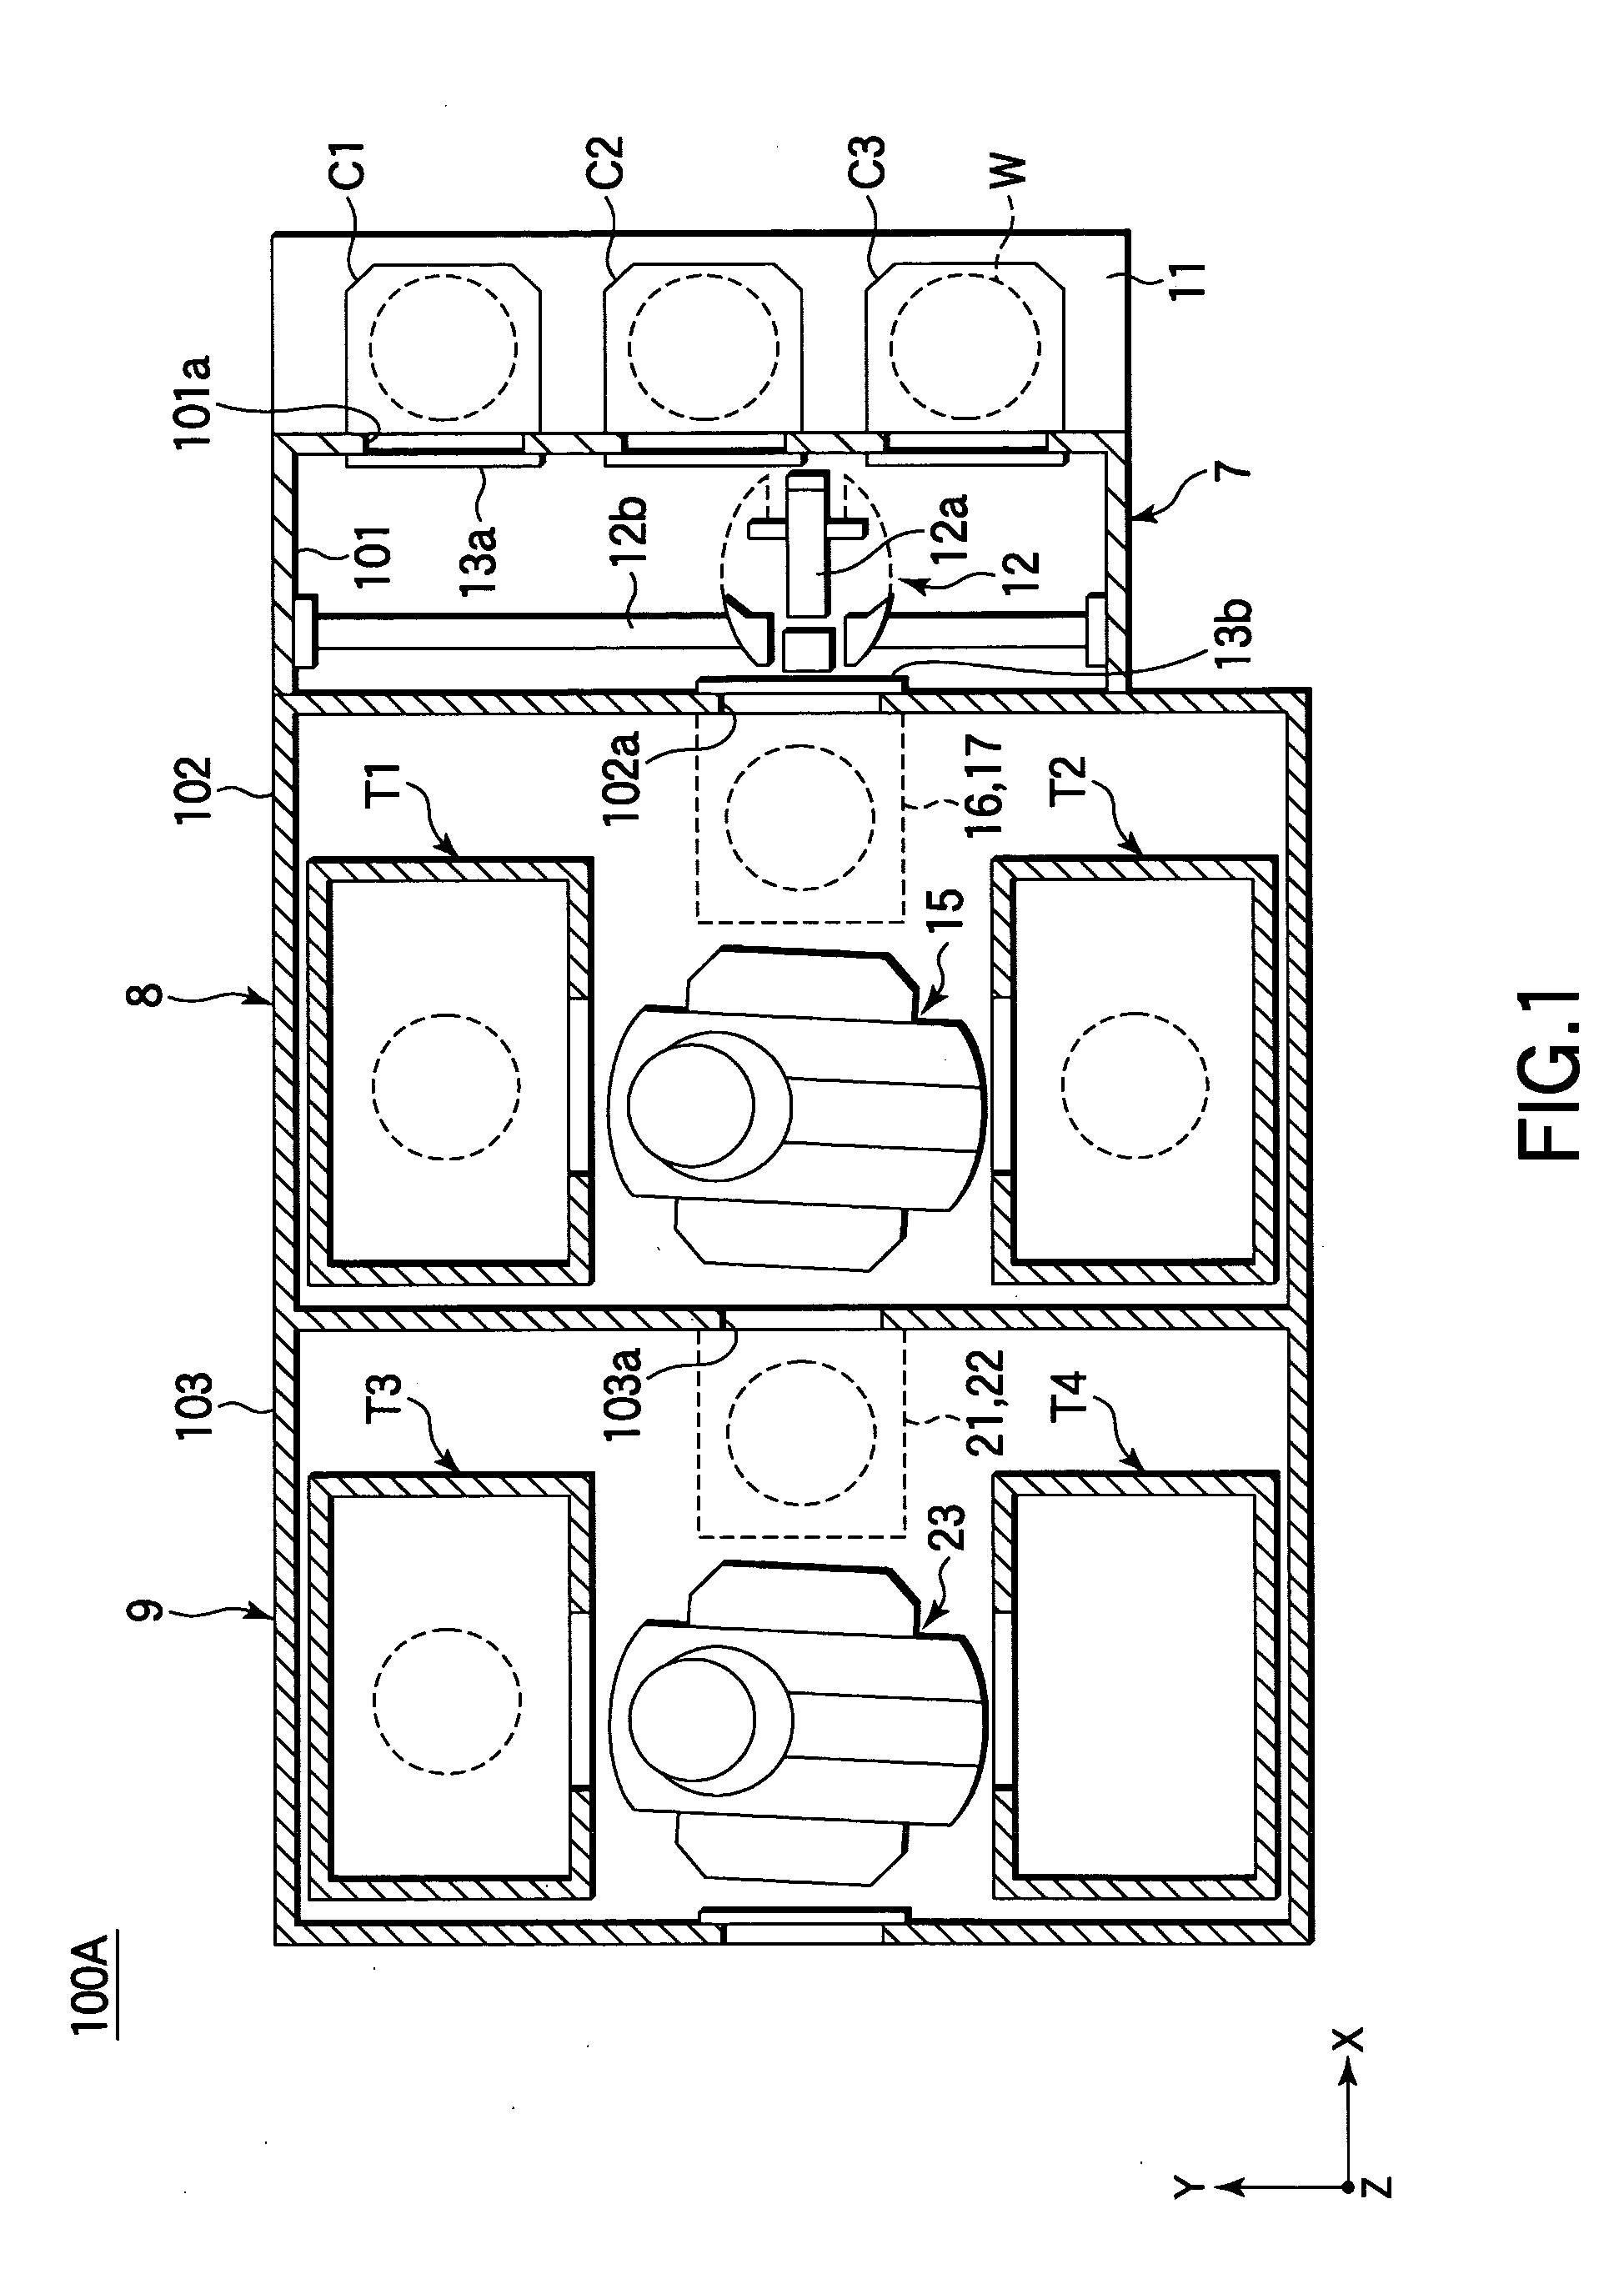 Substrate processing apparatus and method